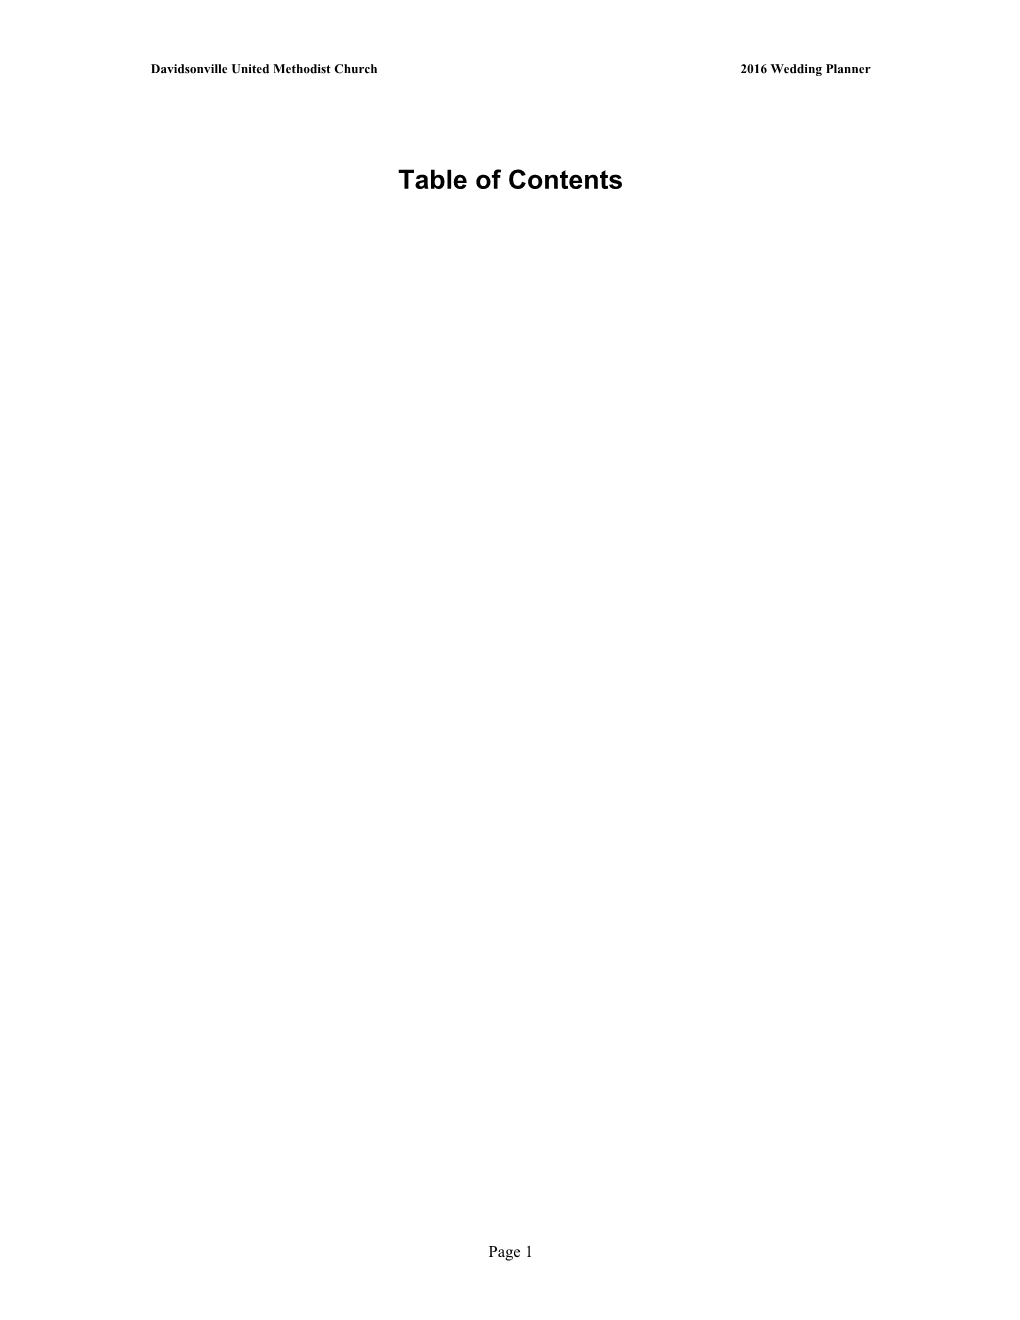 Table of Contents s263